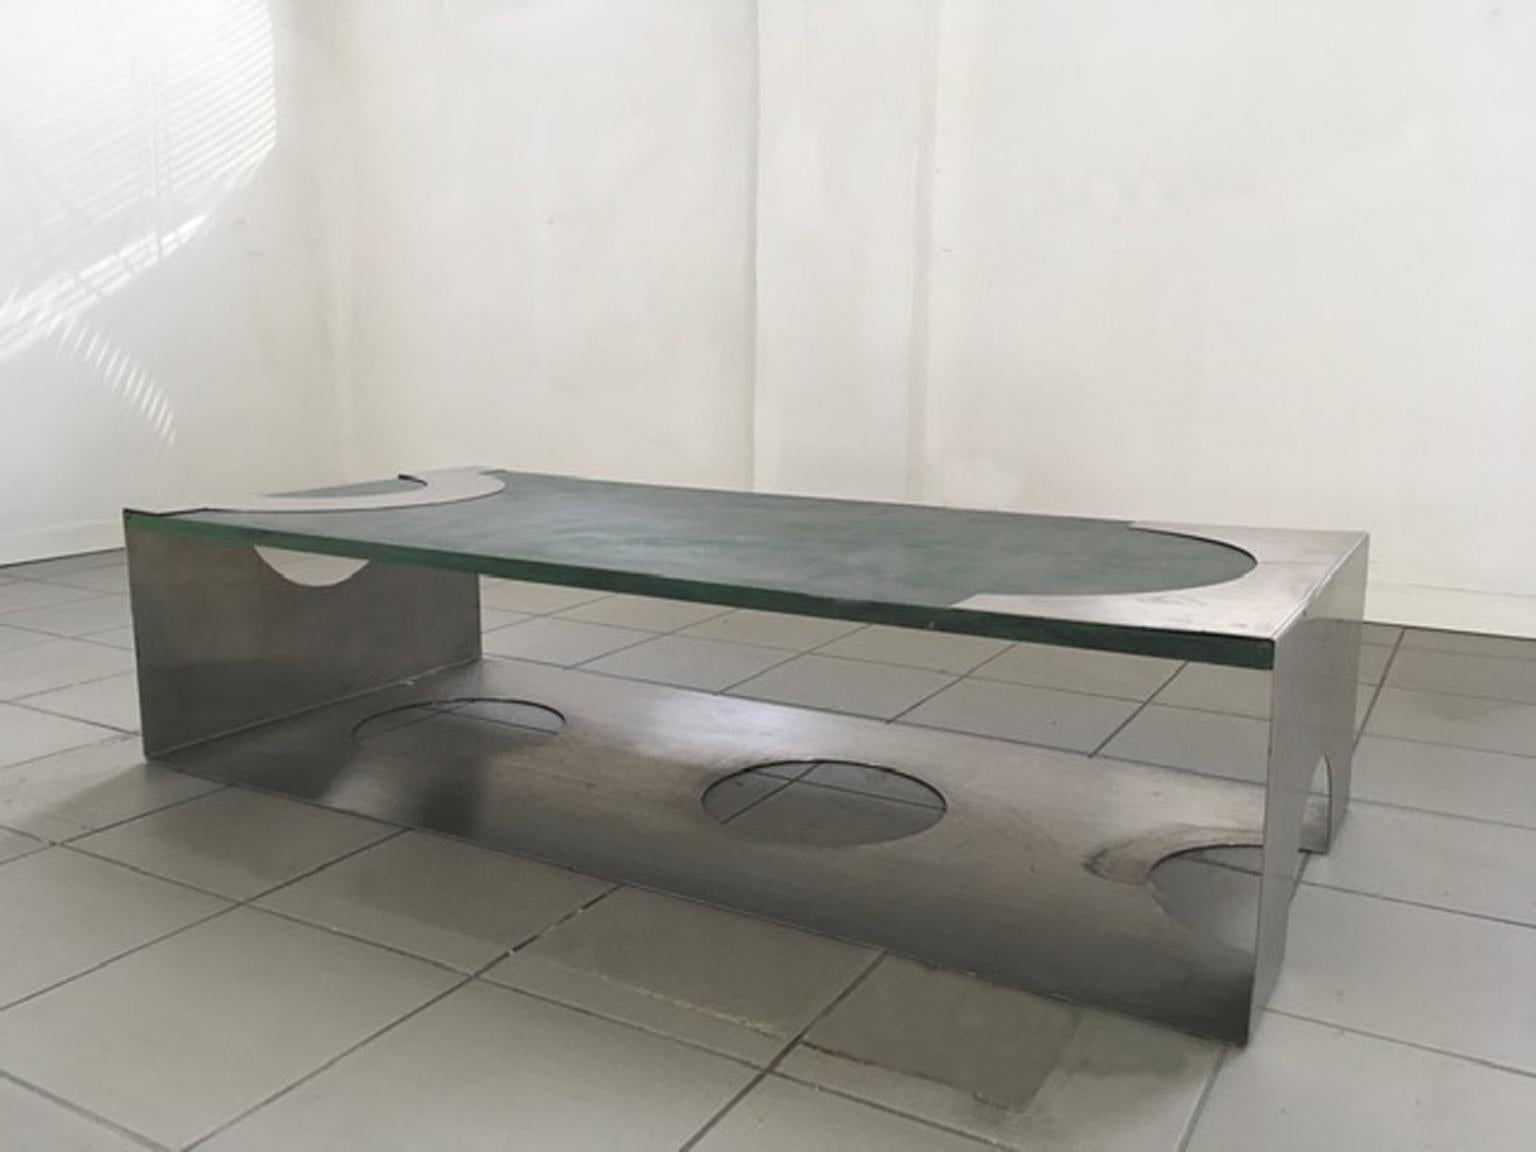 1970 Post-Modern Green Patinated Wood and Stainless Steel Coffee Table In Good Condition For Sale In Brescia, IT